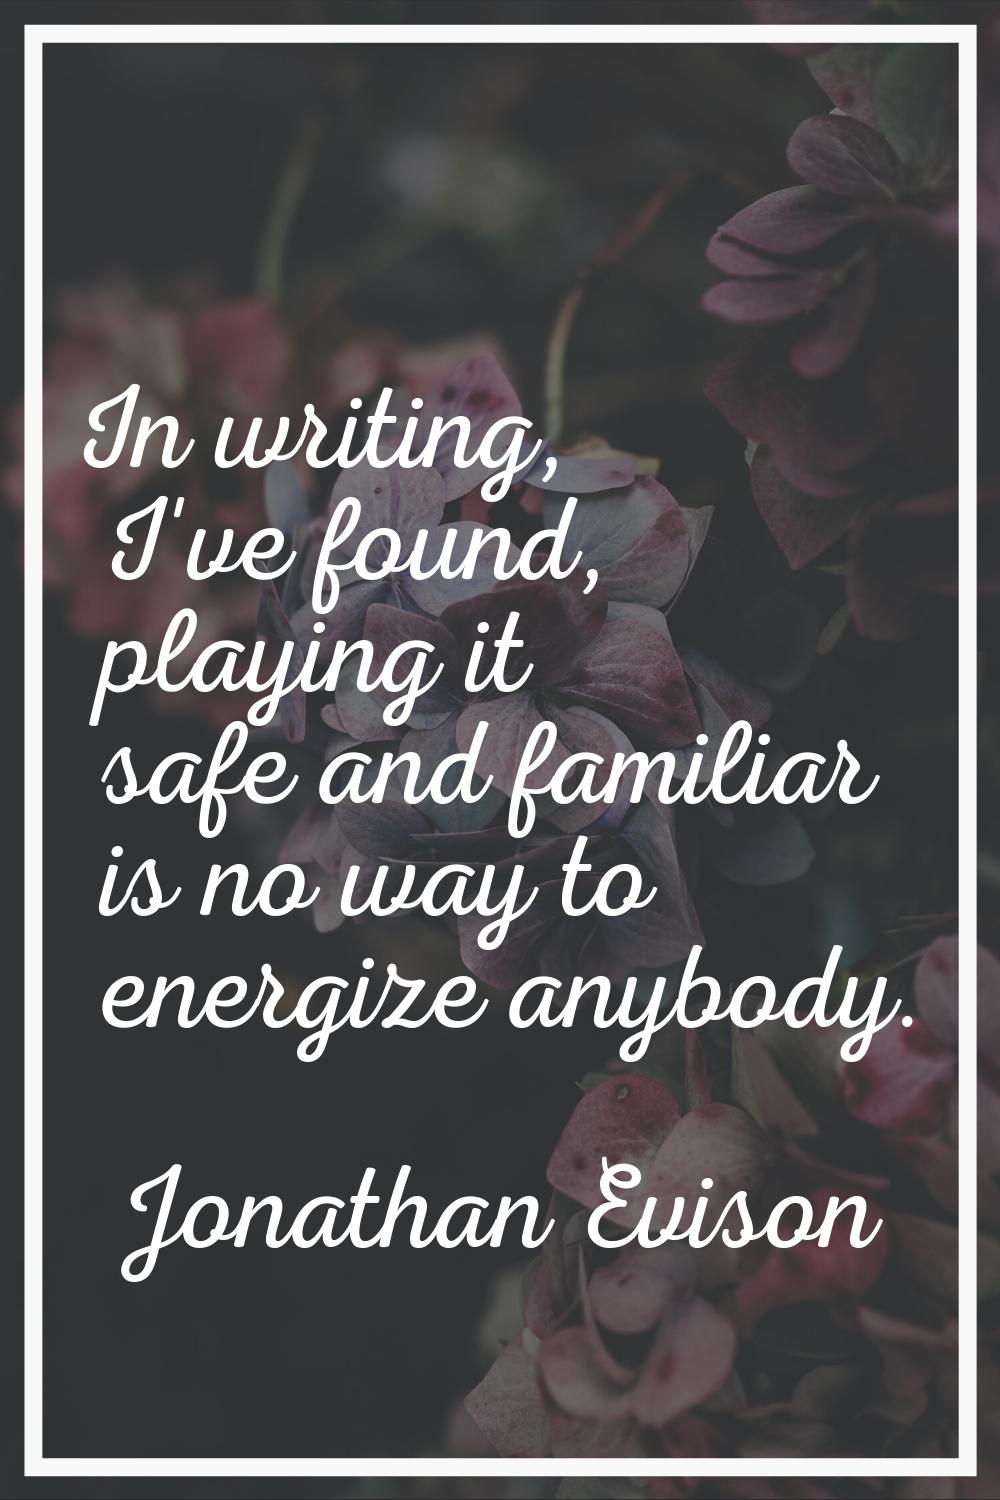 In writing, I've found, playing it safe and familiar is no way to energize anybody.